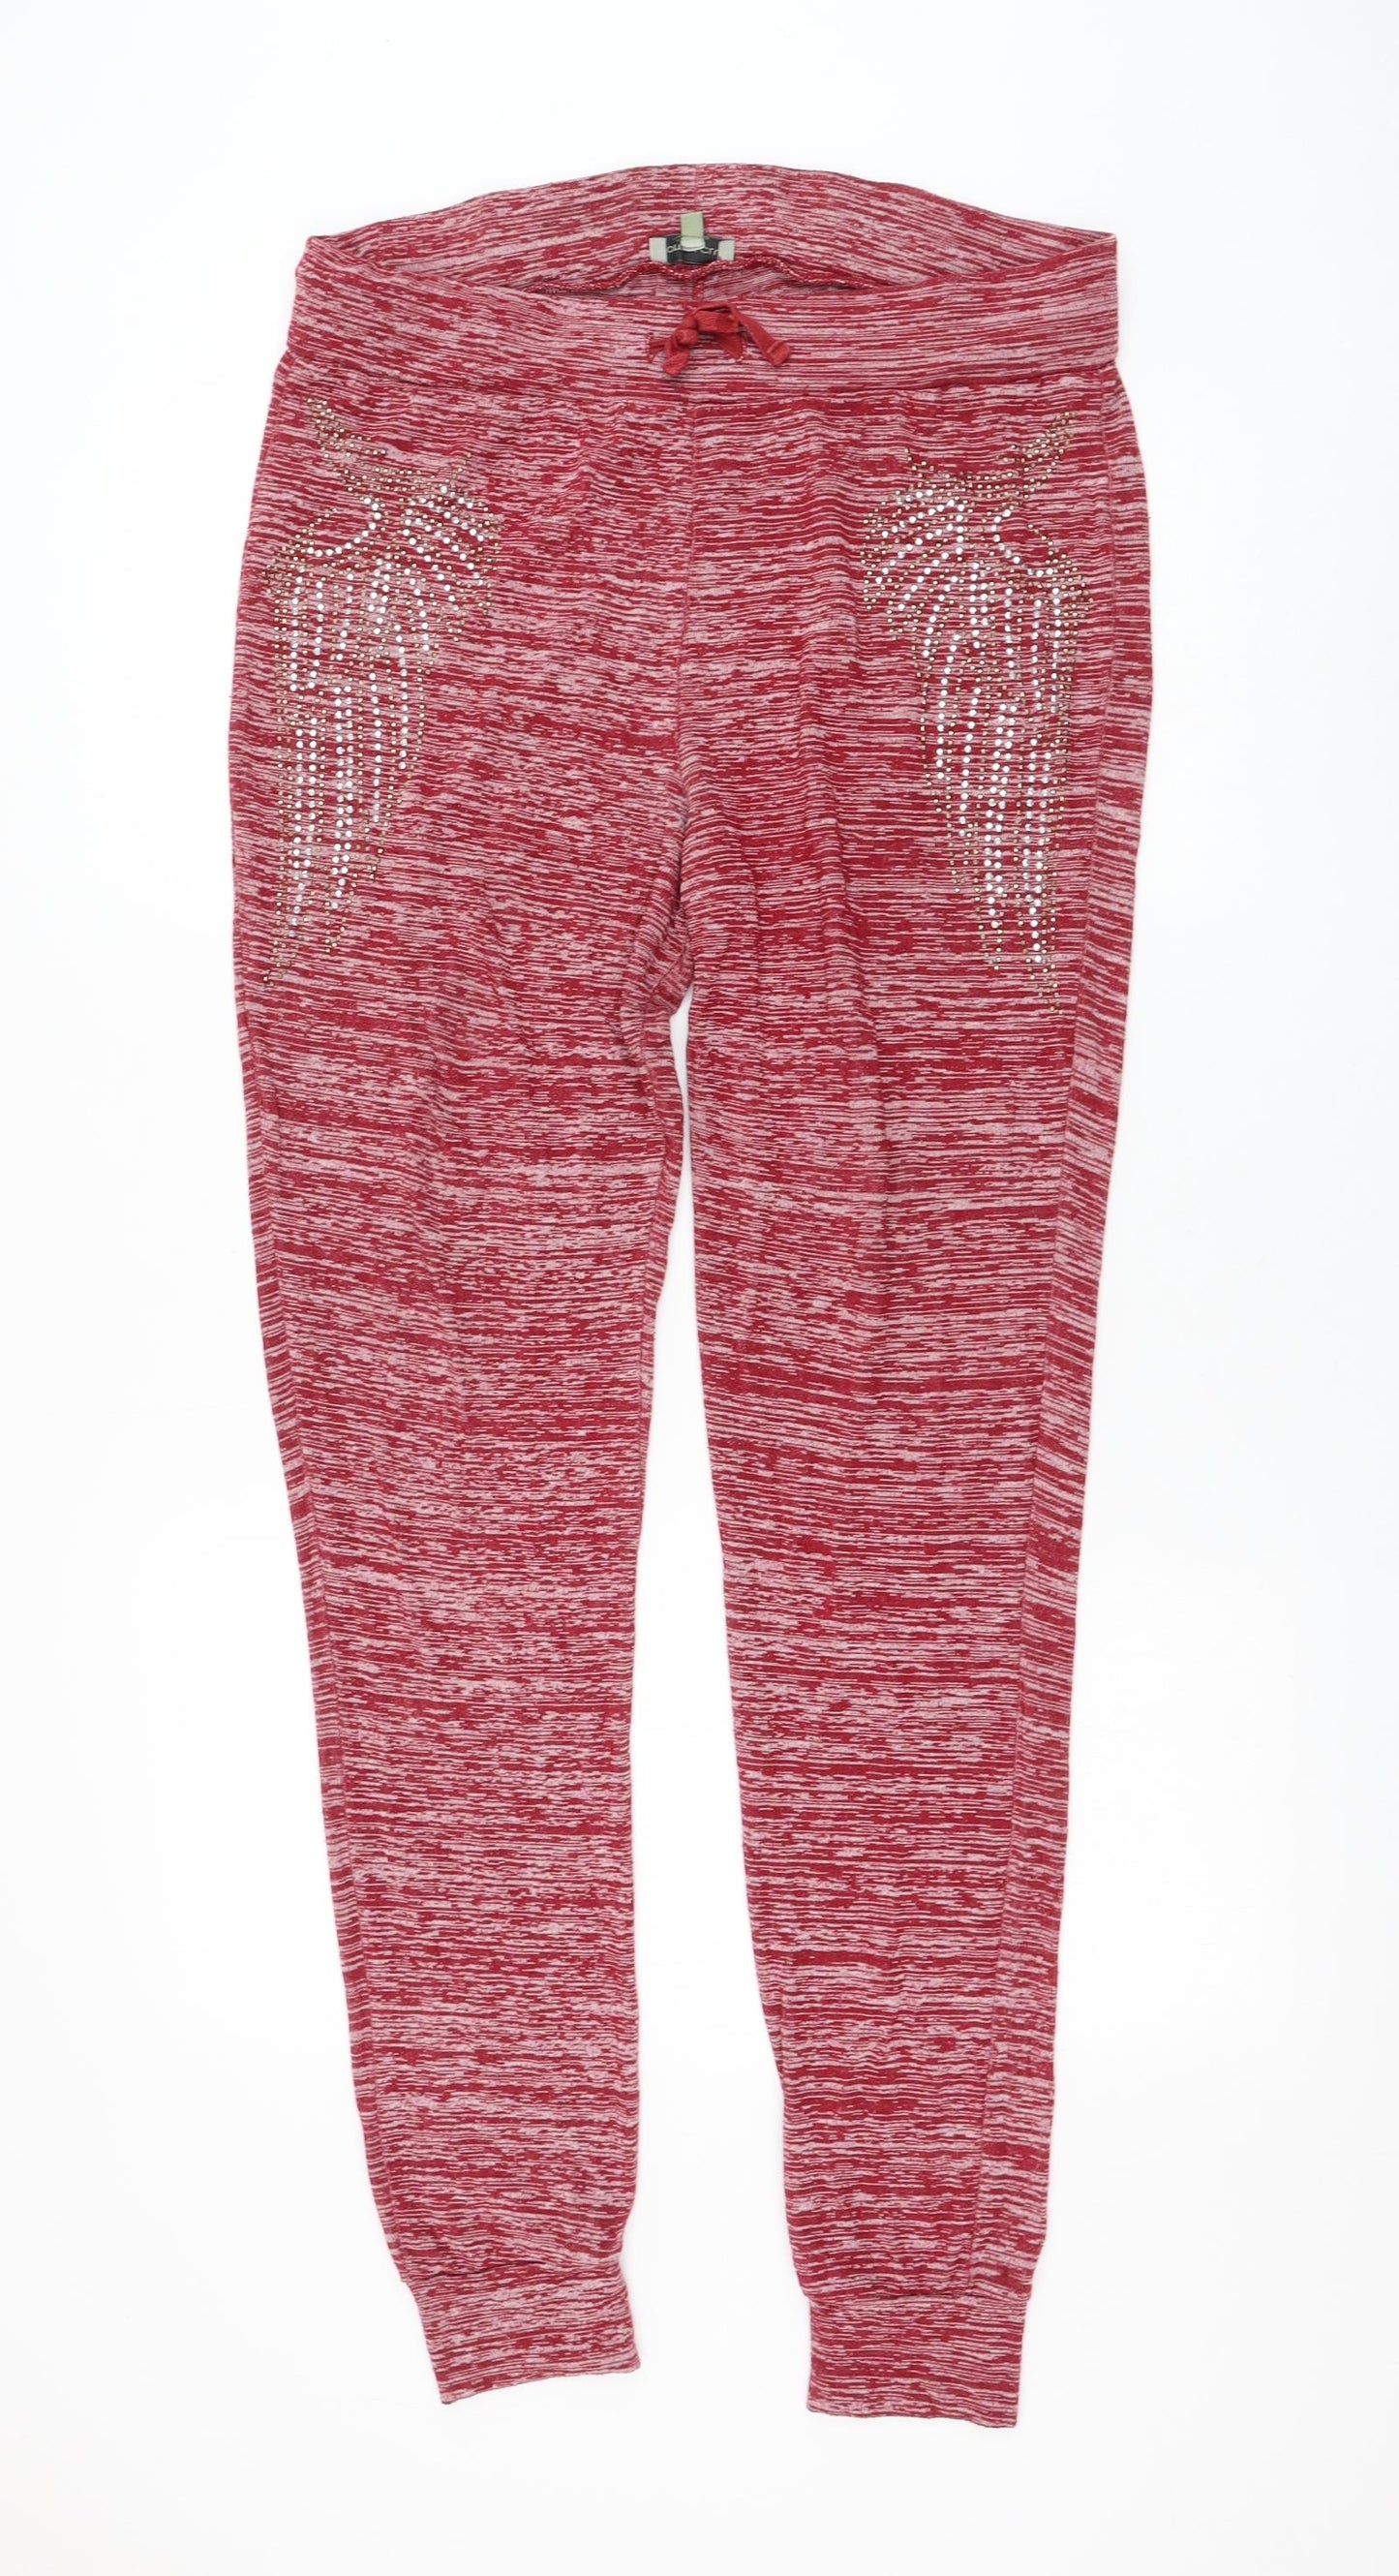 COTTON CLUB Womens Red Polyester Jogger Trousers Size XL L32 in Regular Drawstring